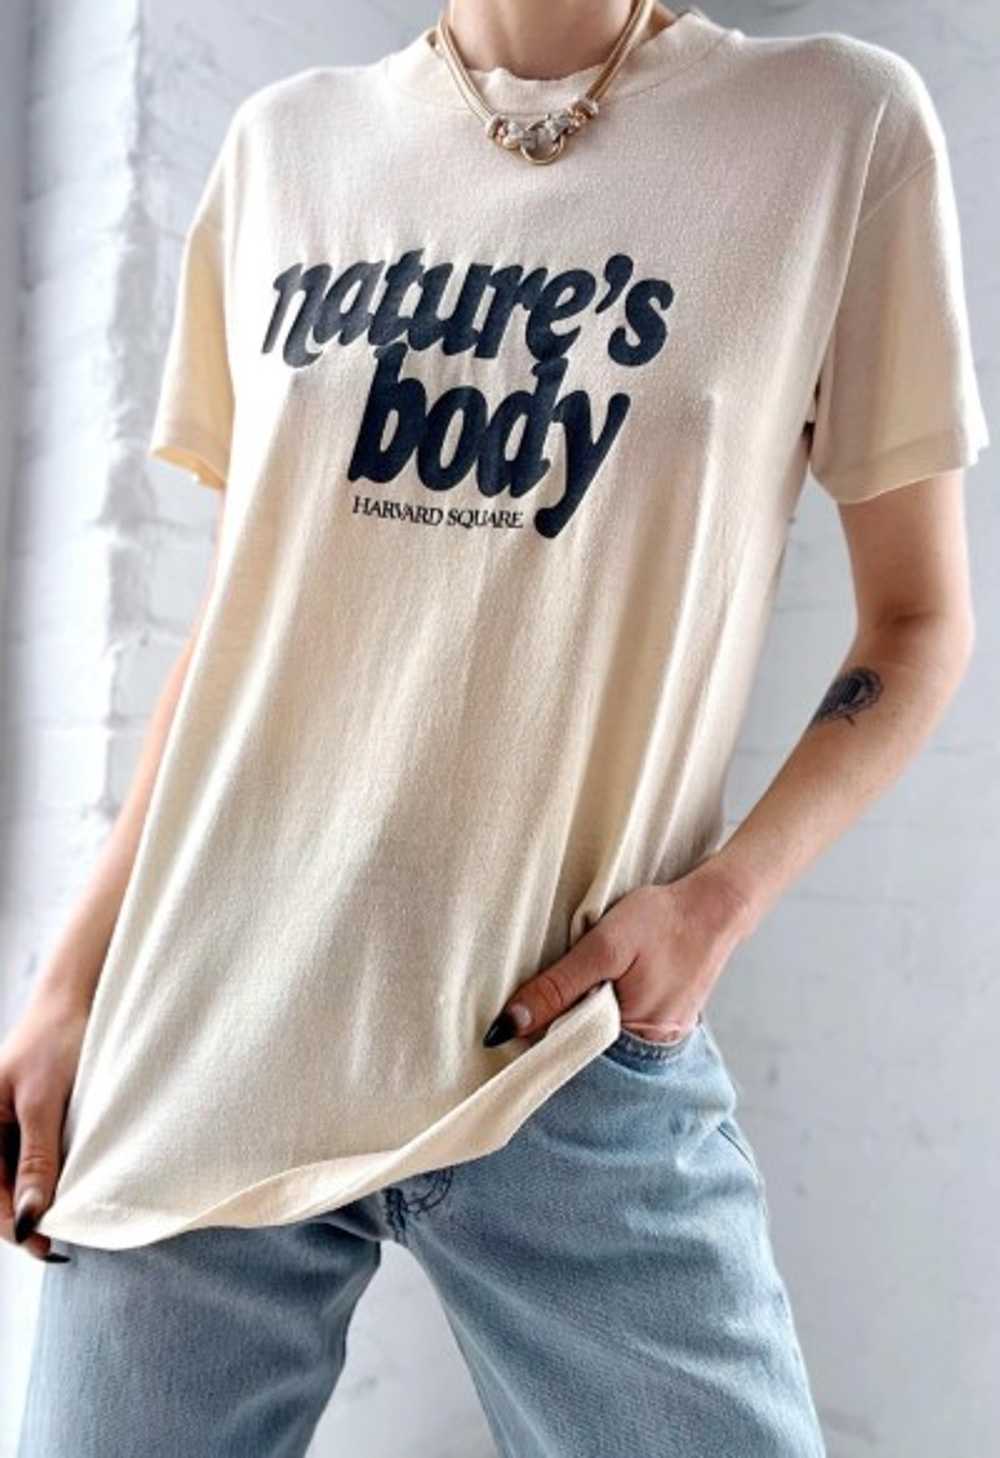 natures body tee - image 1